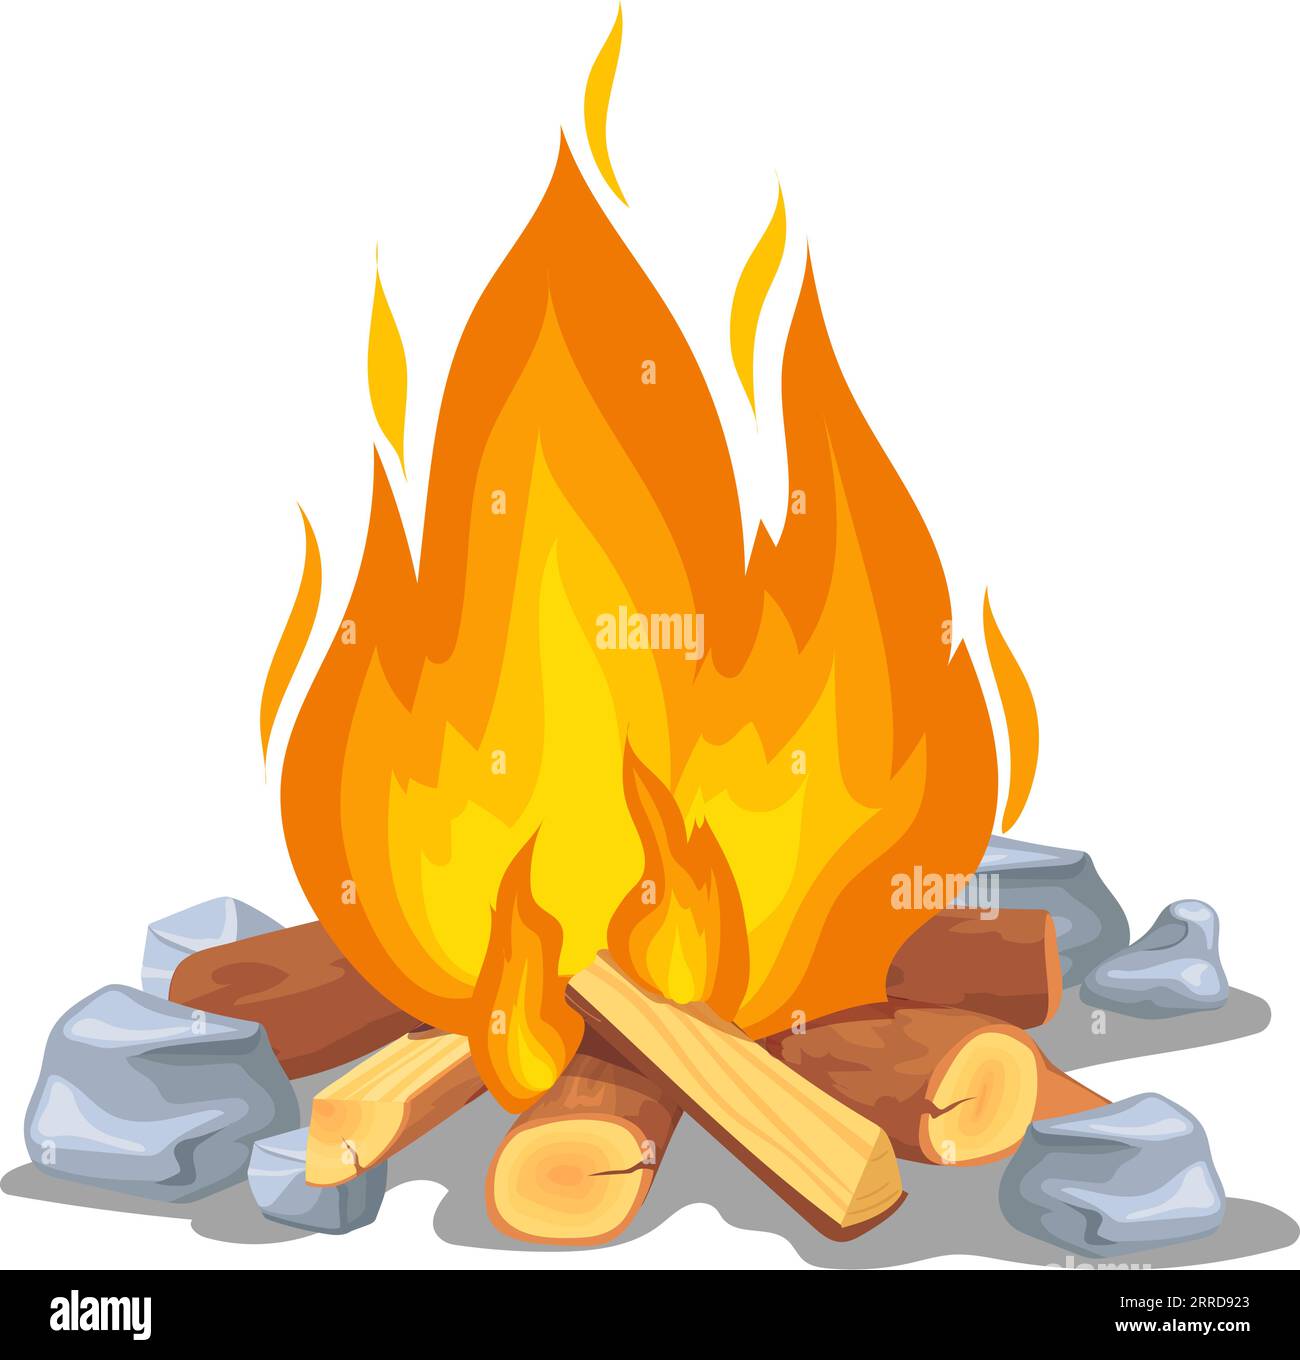 Campfire cartoon icon. Burning wood logs with hot fire isolated on white background Stock Vector